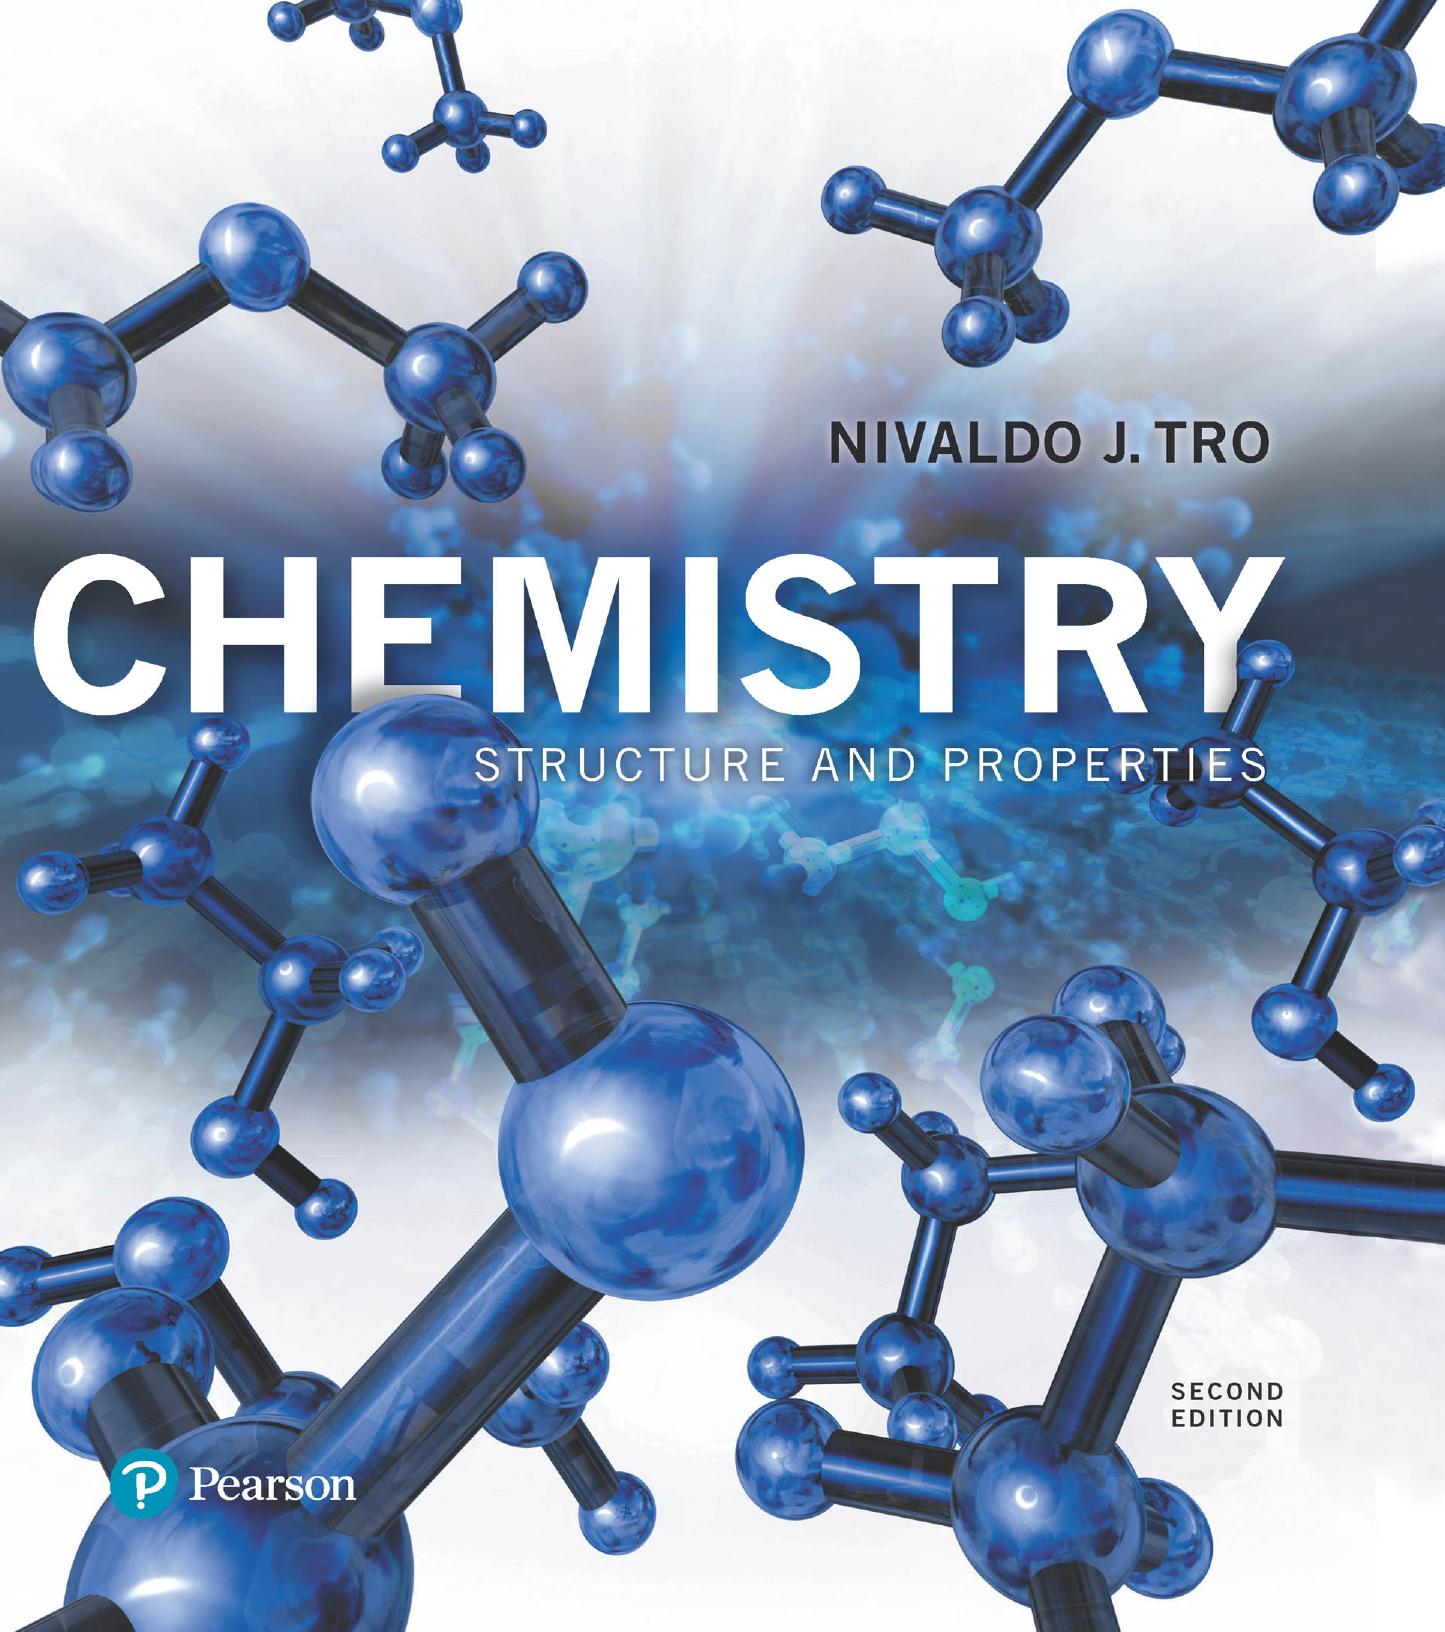 Chemistry Structure and Properties 2nd Edition by Nivaldo J. Tro.jpg